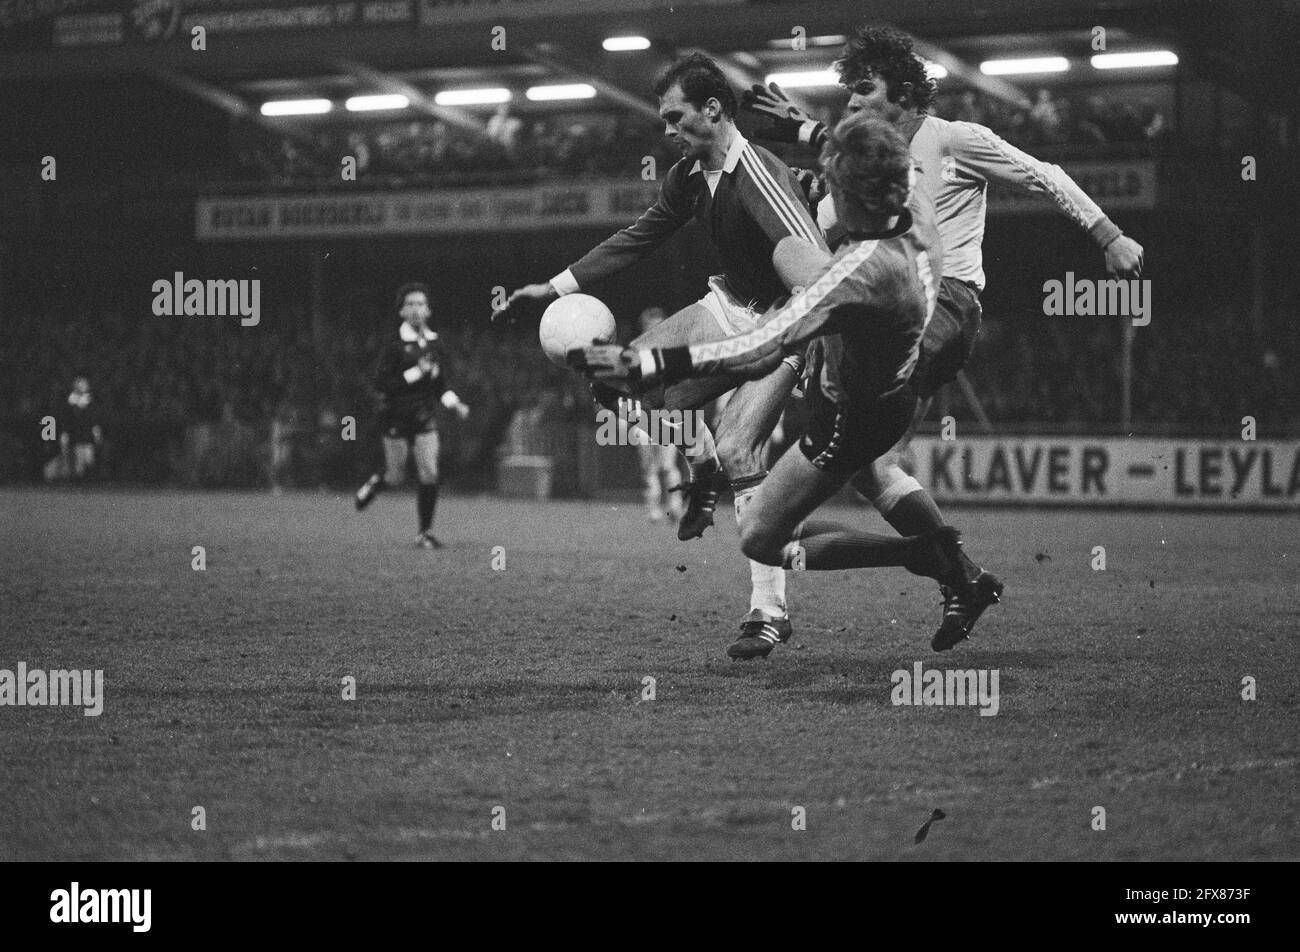 AZ 67 against FC Utrecht 1-0; from left to right Metgod (AZ), goalkeeper van Breukelen and van Hanegem (Utrecht), April 5, 1980, goalkeepers, sports, soccer, The Netherlands, 20th century press agency photo, news to remember, documentary, historic photography 1945-1990, visual stories, human history of the Twentieth Century, capturing moments in time Stock Photo